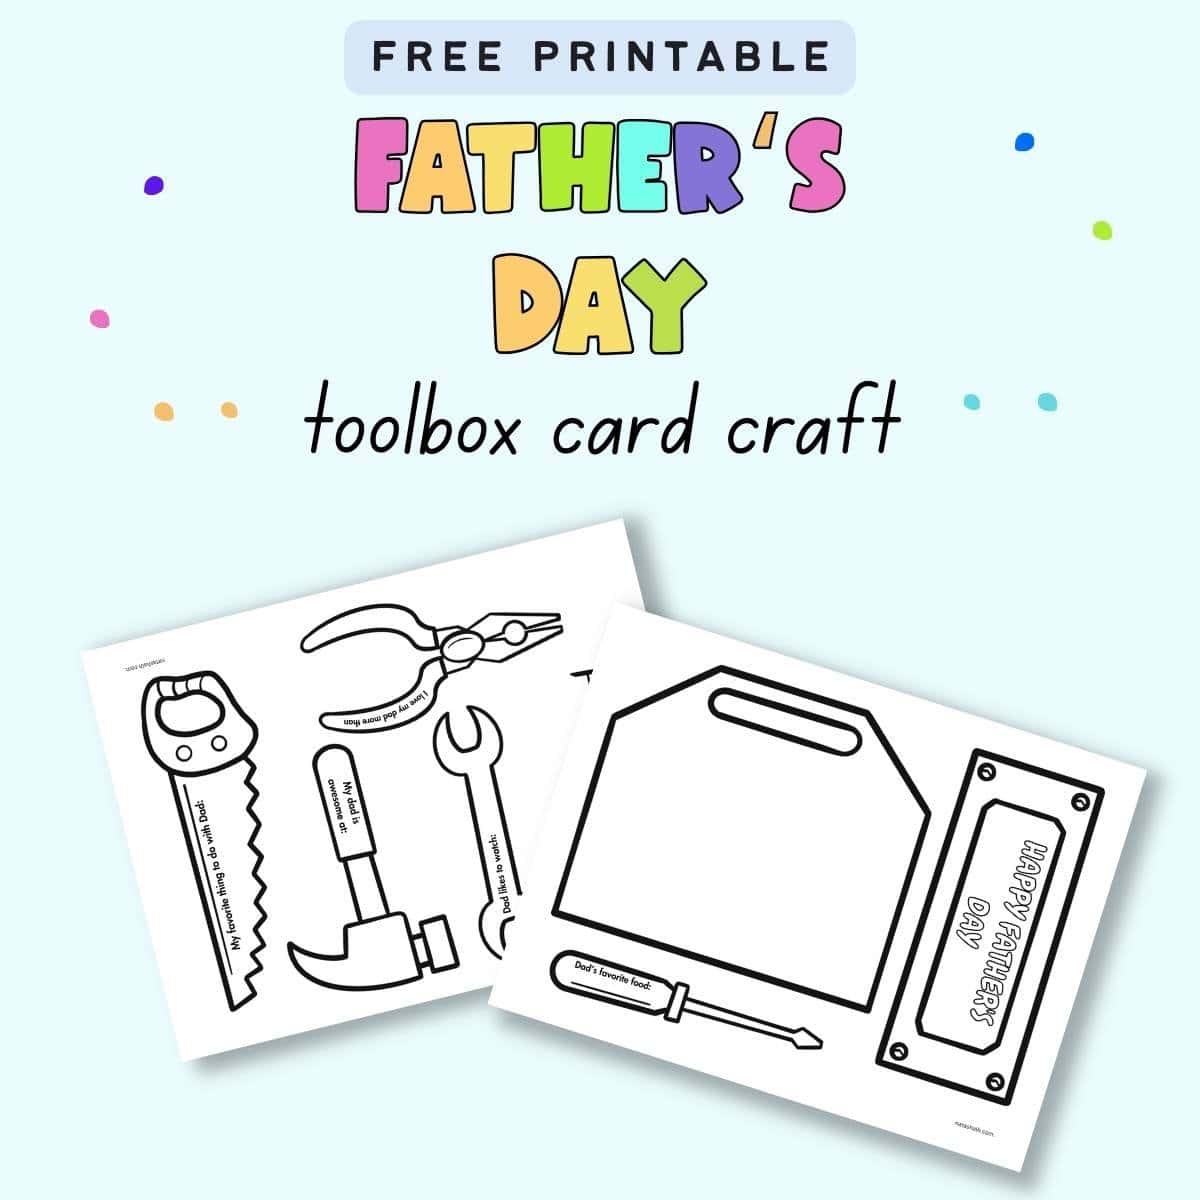 Text "free printable Father's Day toolbox card craft" with a preview of two printable pages to make a paper toolbox